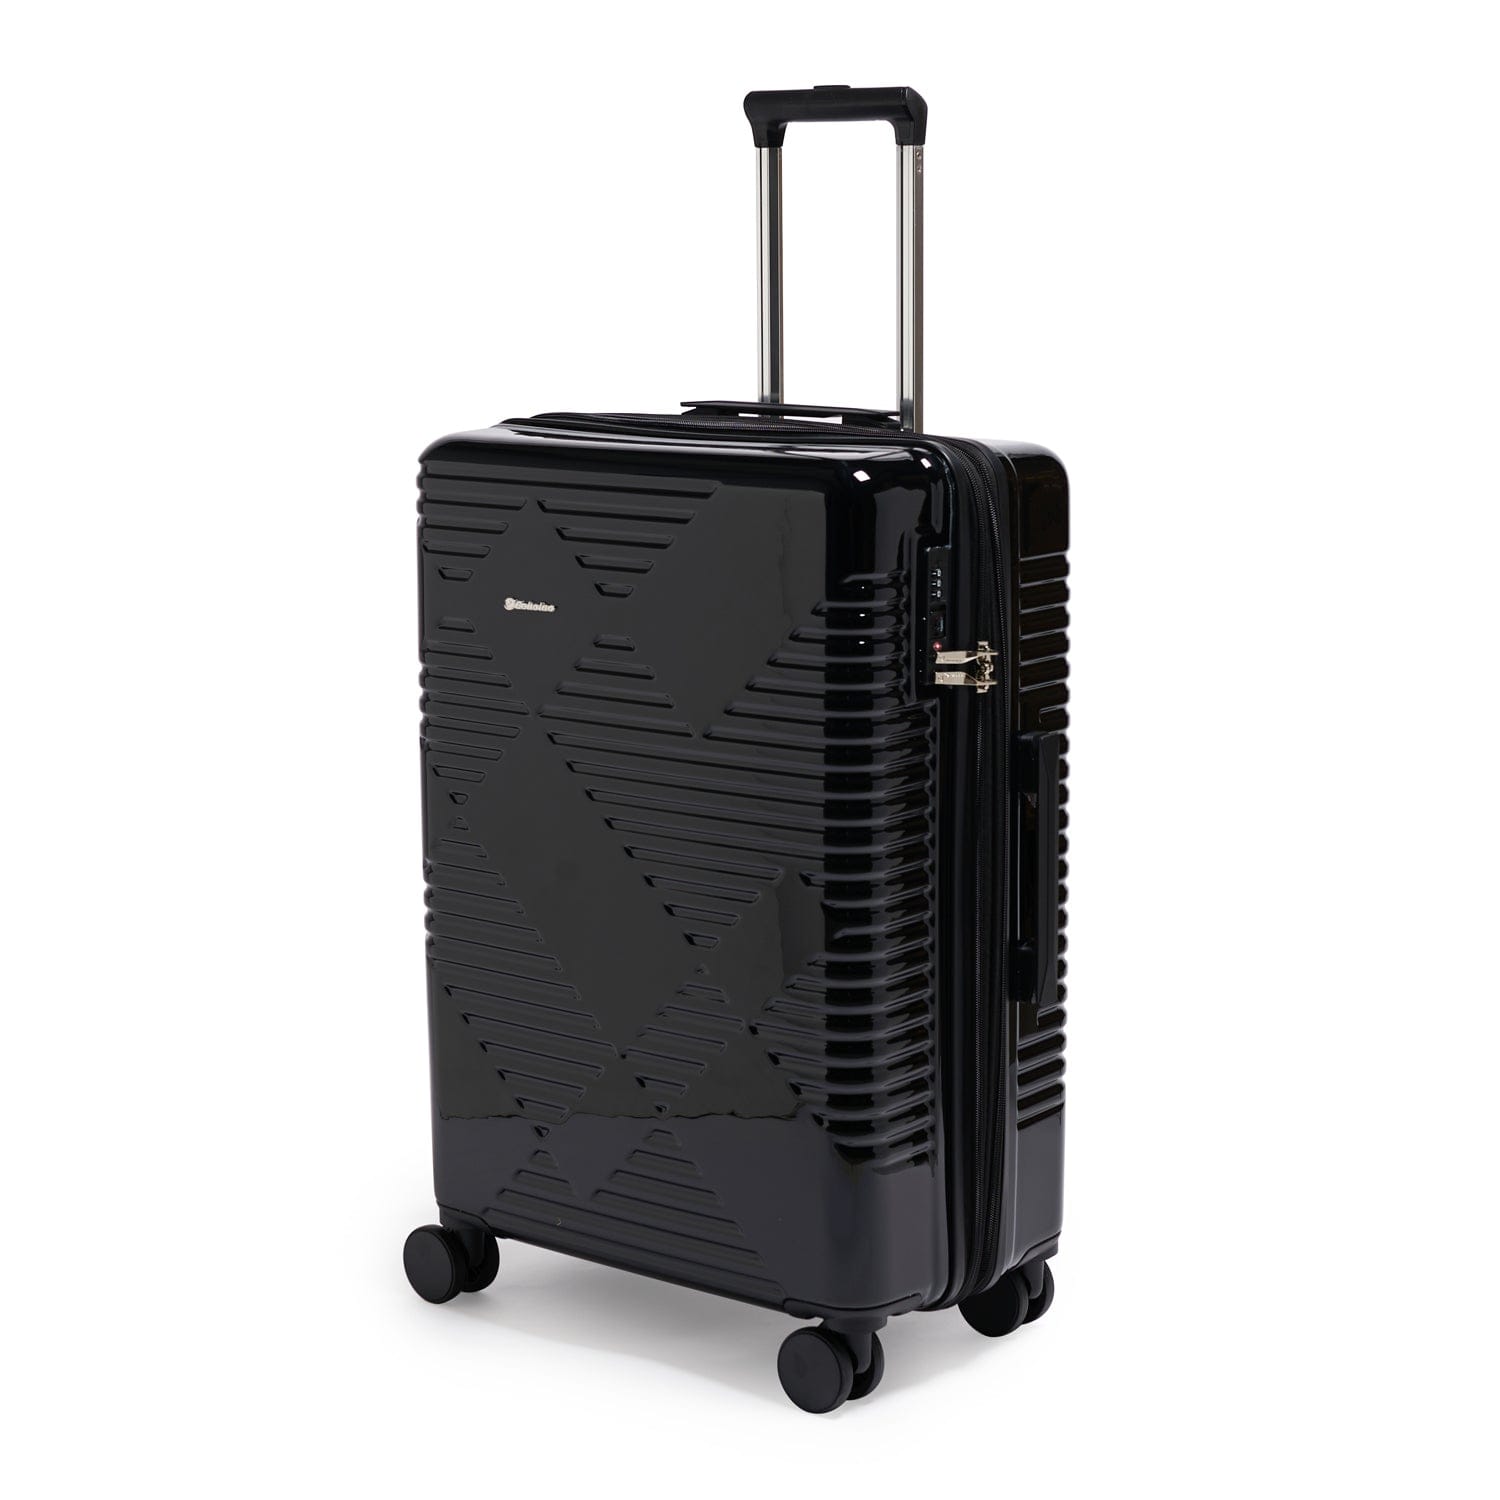 Echolac Extravagant 71cm Hardcase Expandable 4 Double Wheel Check-In Luggage Trolley Black - CTH0062 S- 20 BLACK